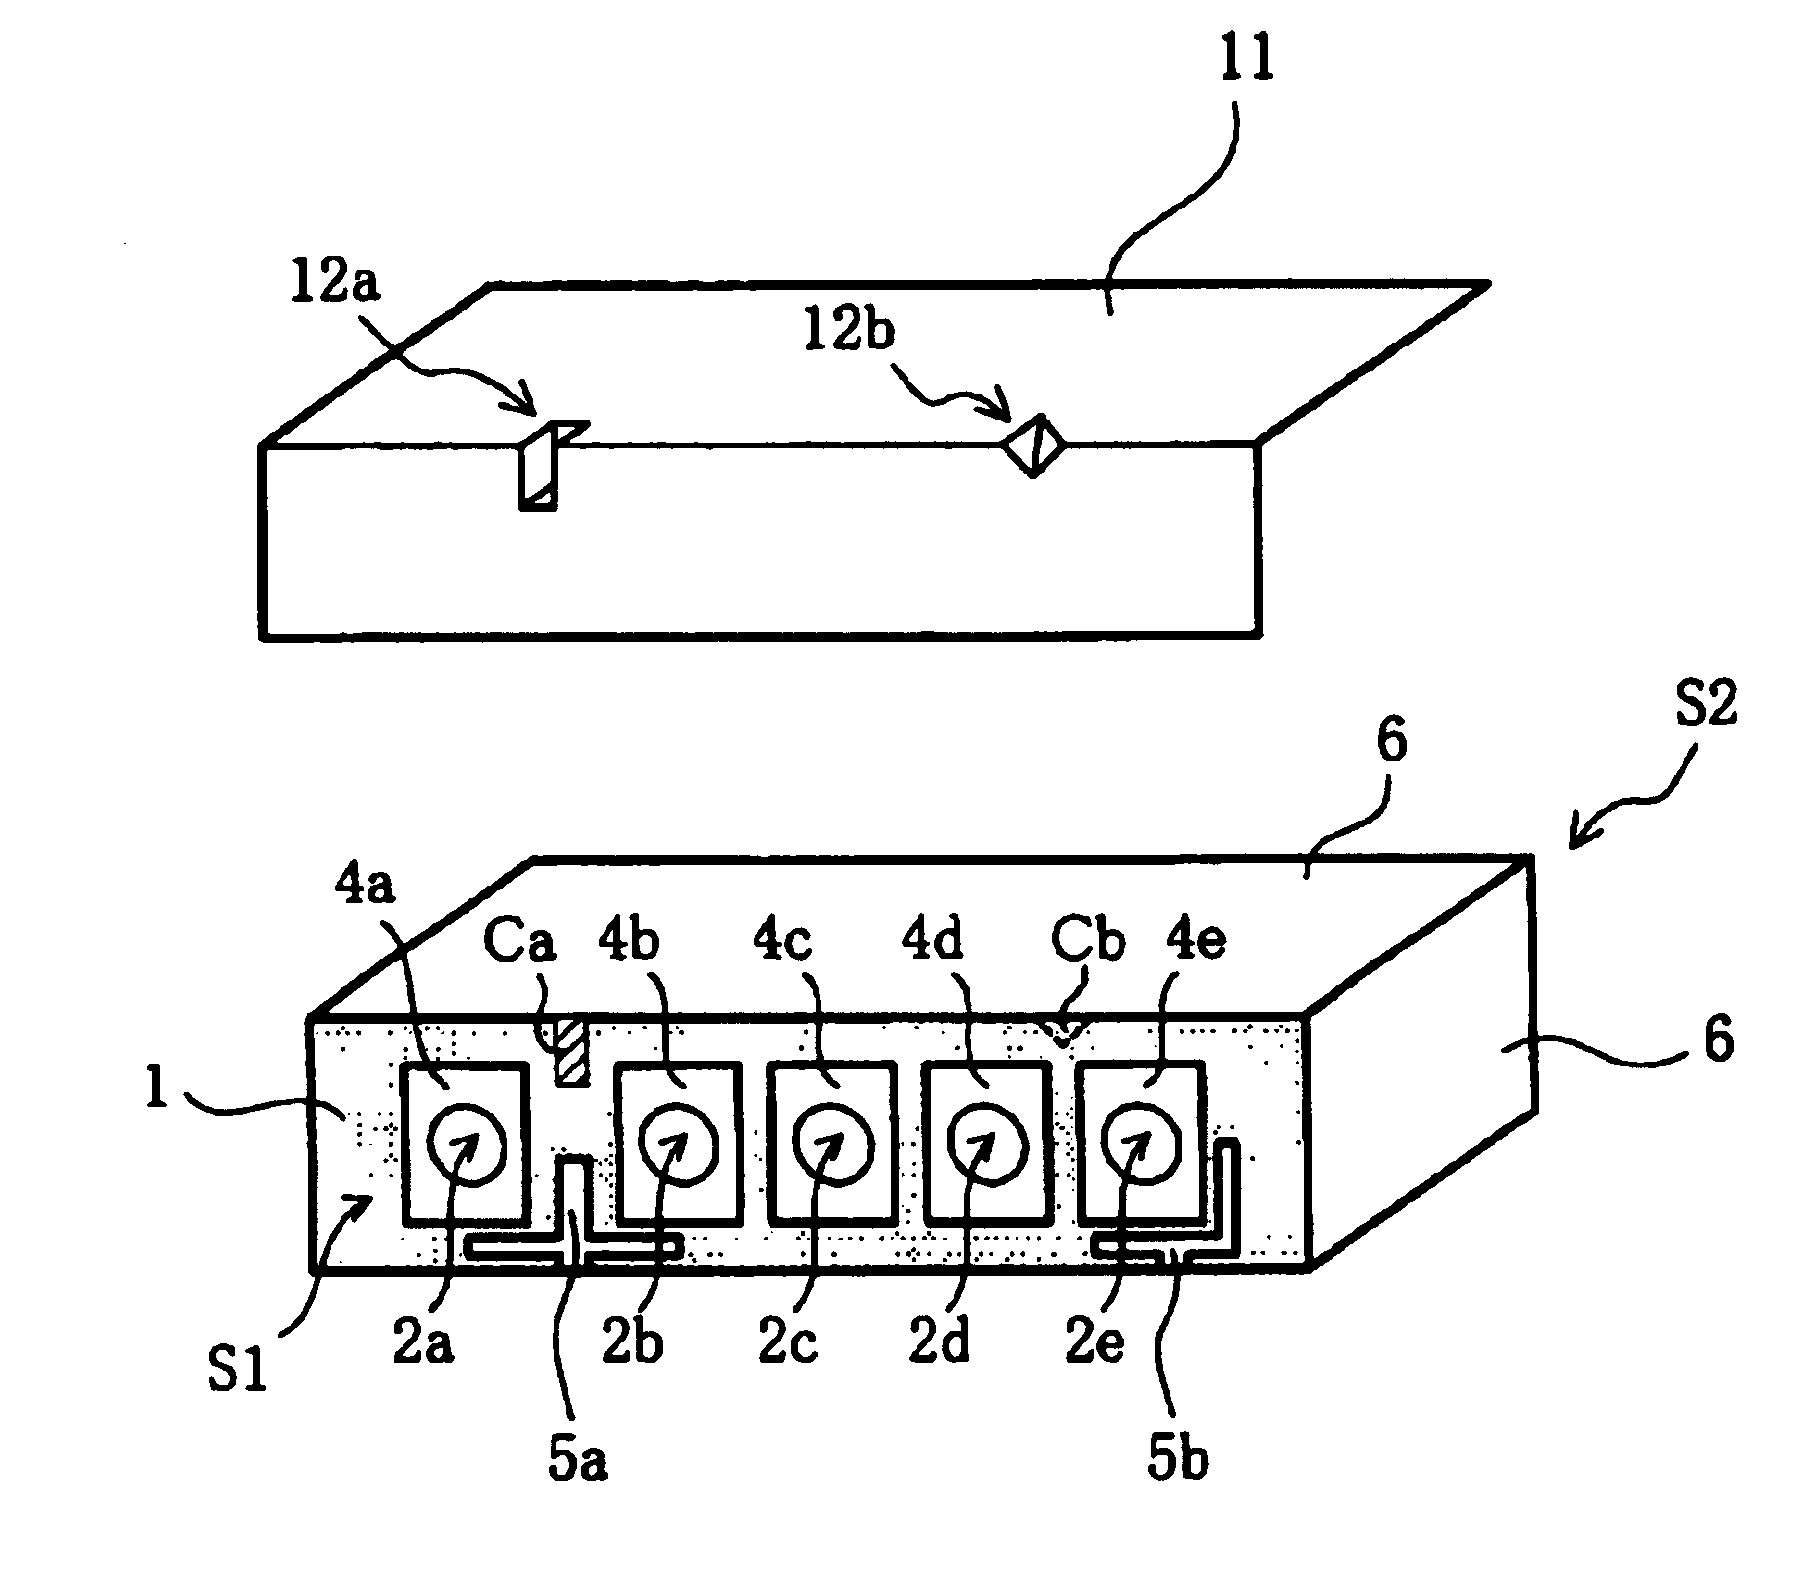 Conductive cover for dielectric filter, dielectric filter, dielectric duplexer, and communication apparatus